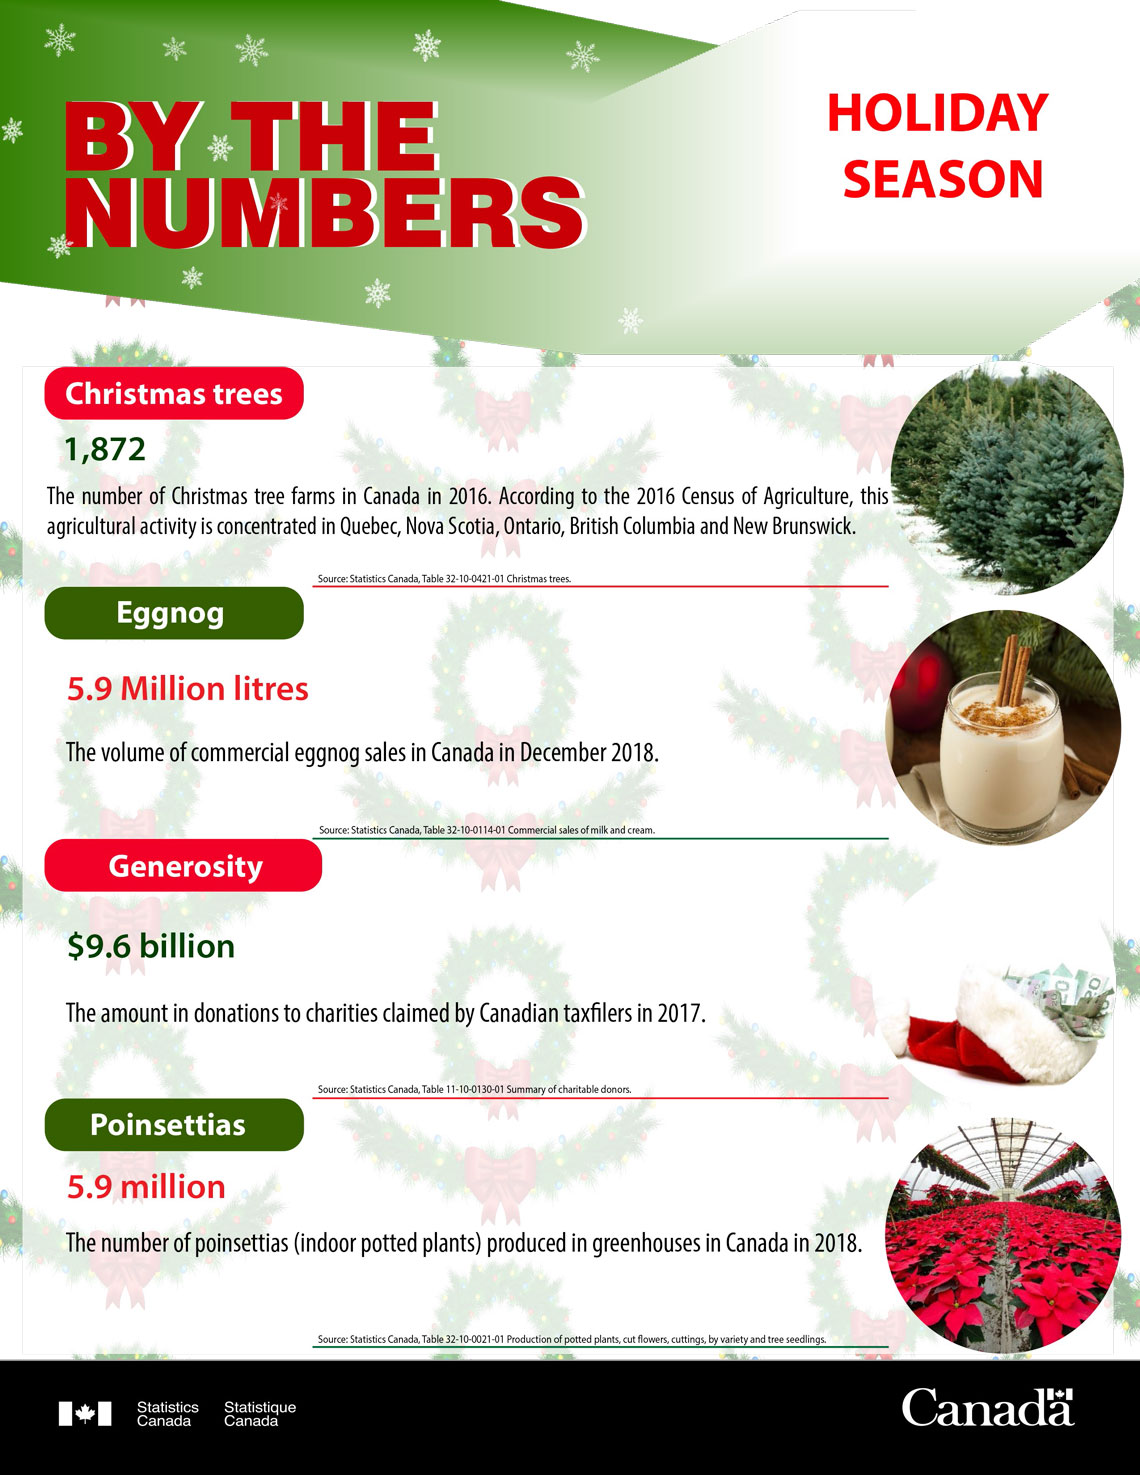 By the numbers - Holiday Season 